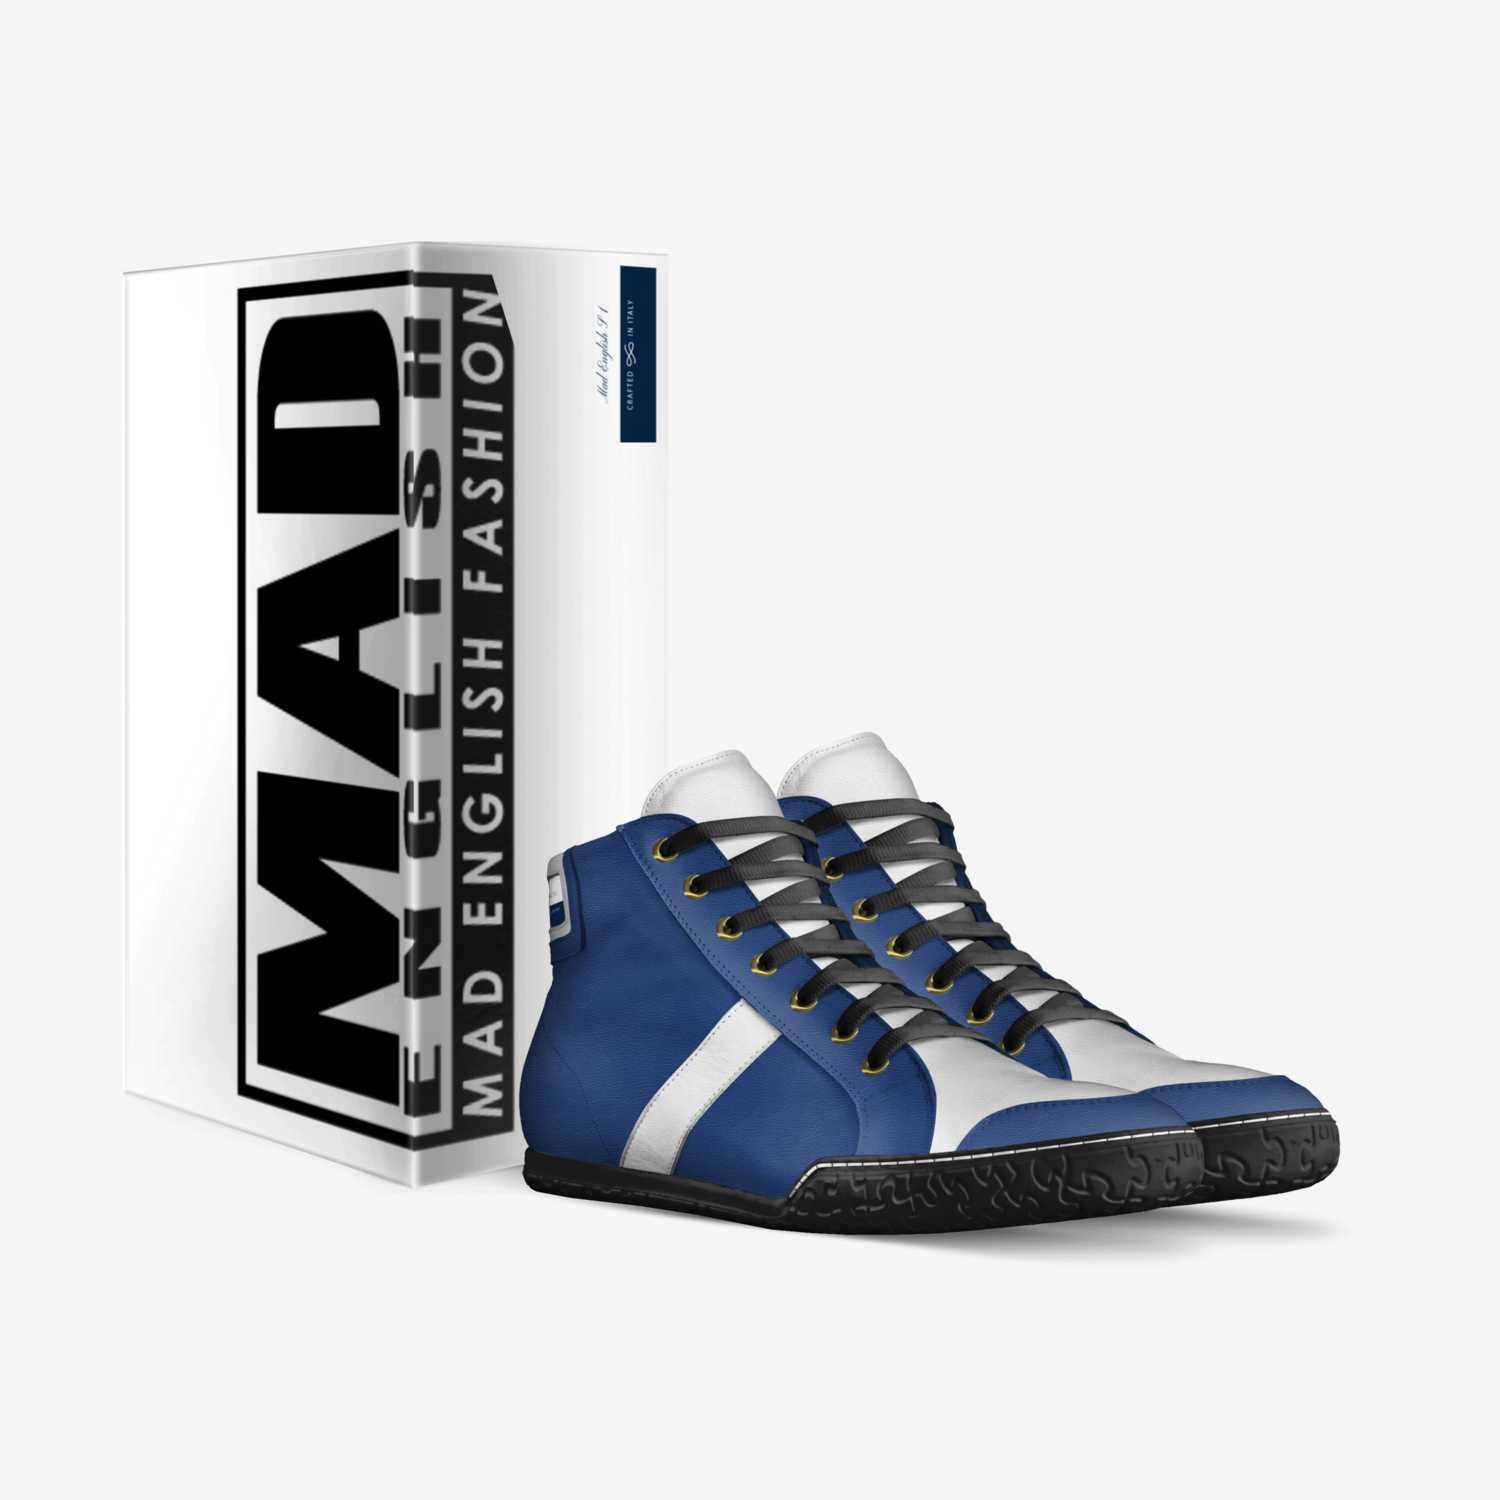 Mad English S 1 custom made in Italy shoes by Keon Pearce | Box view